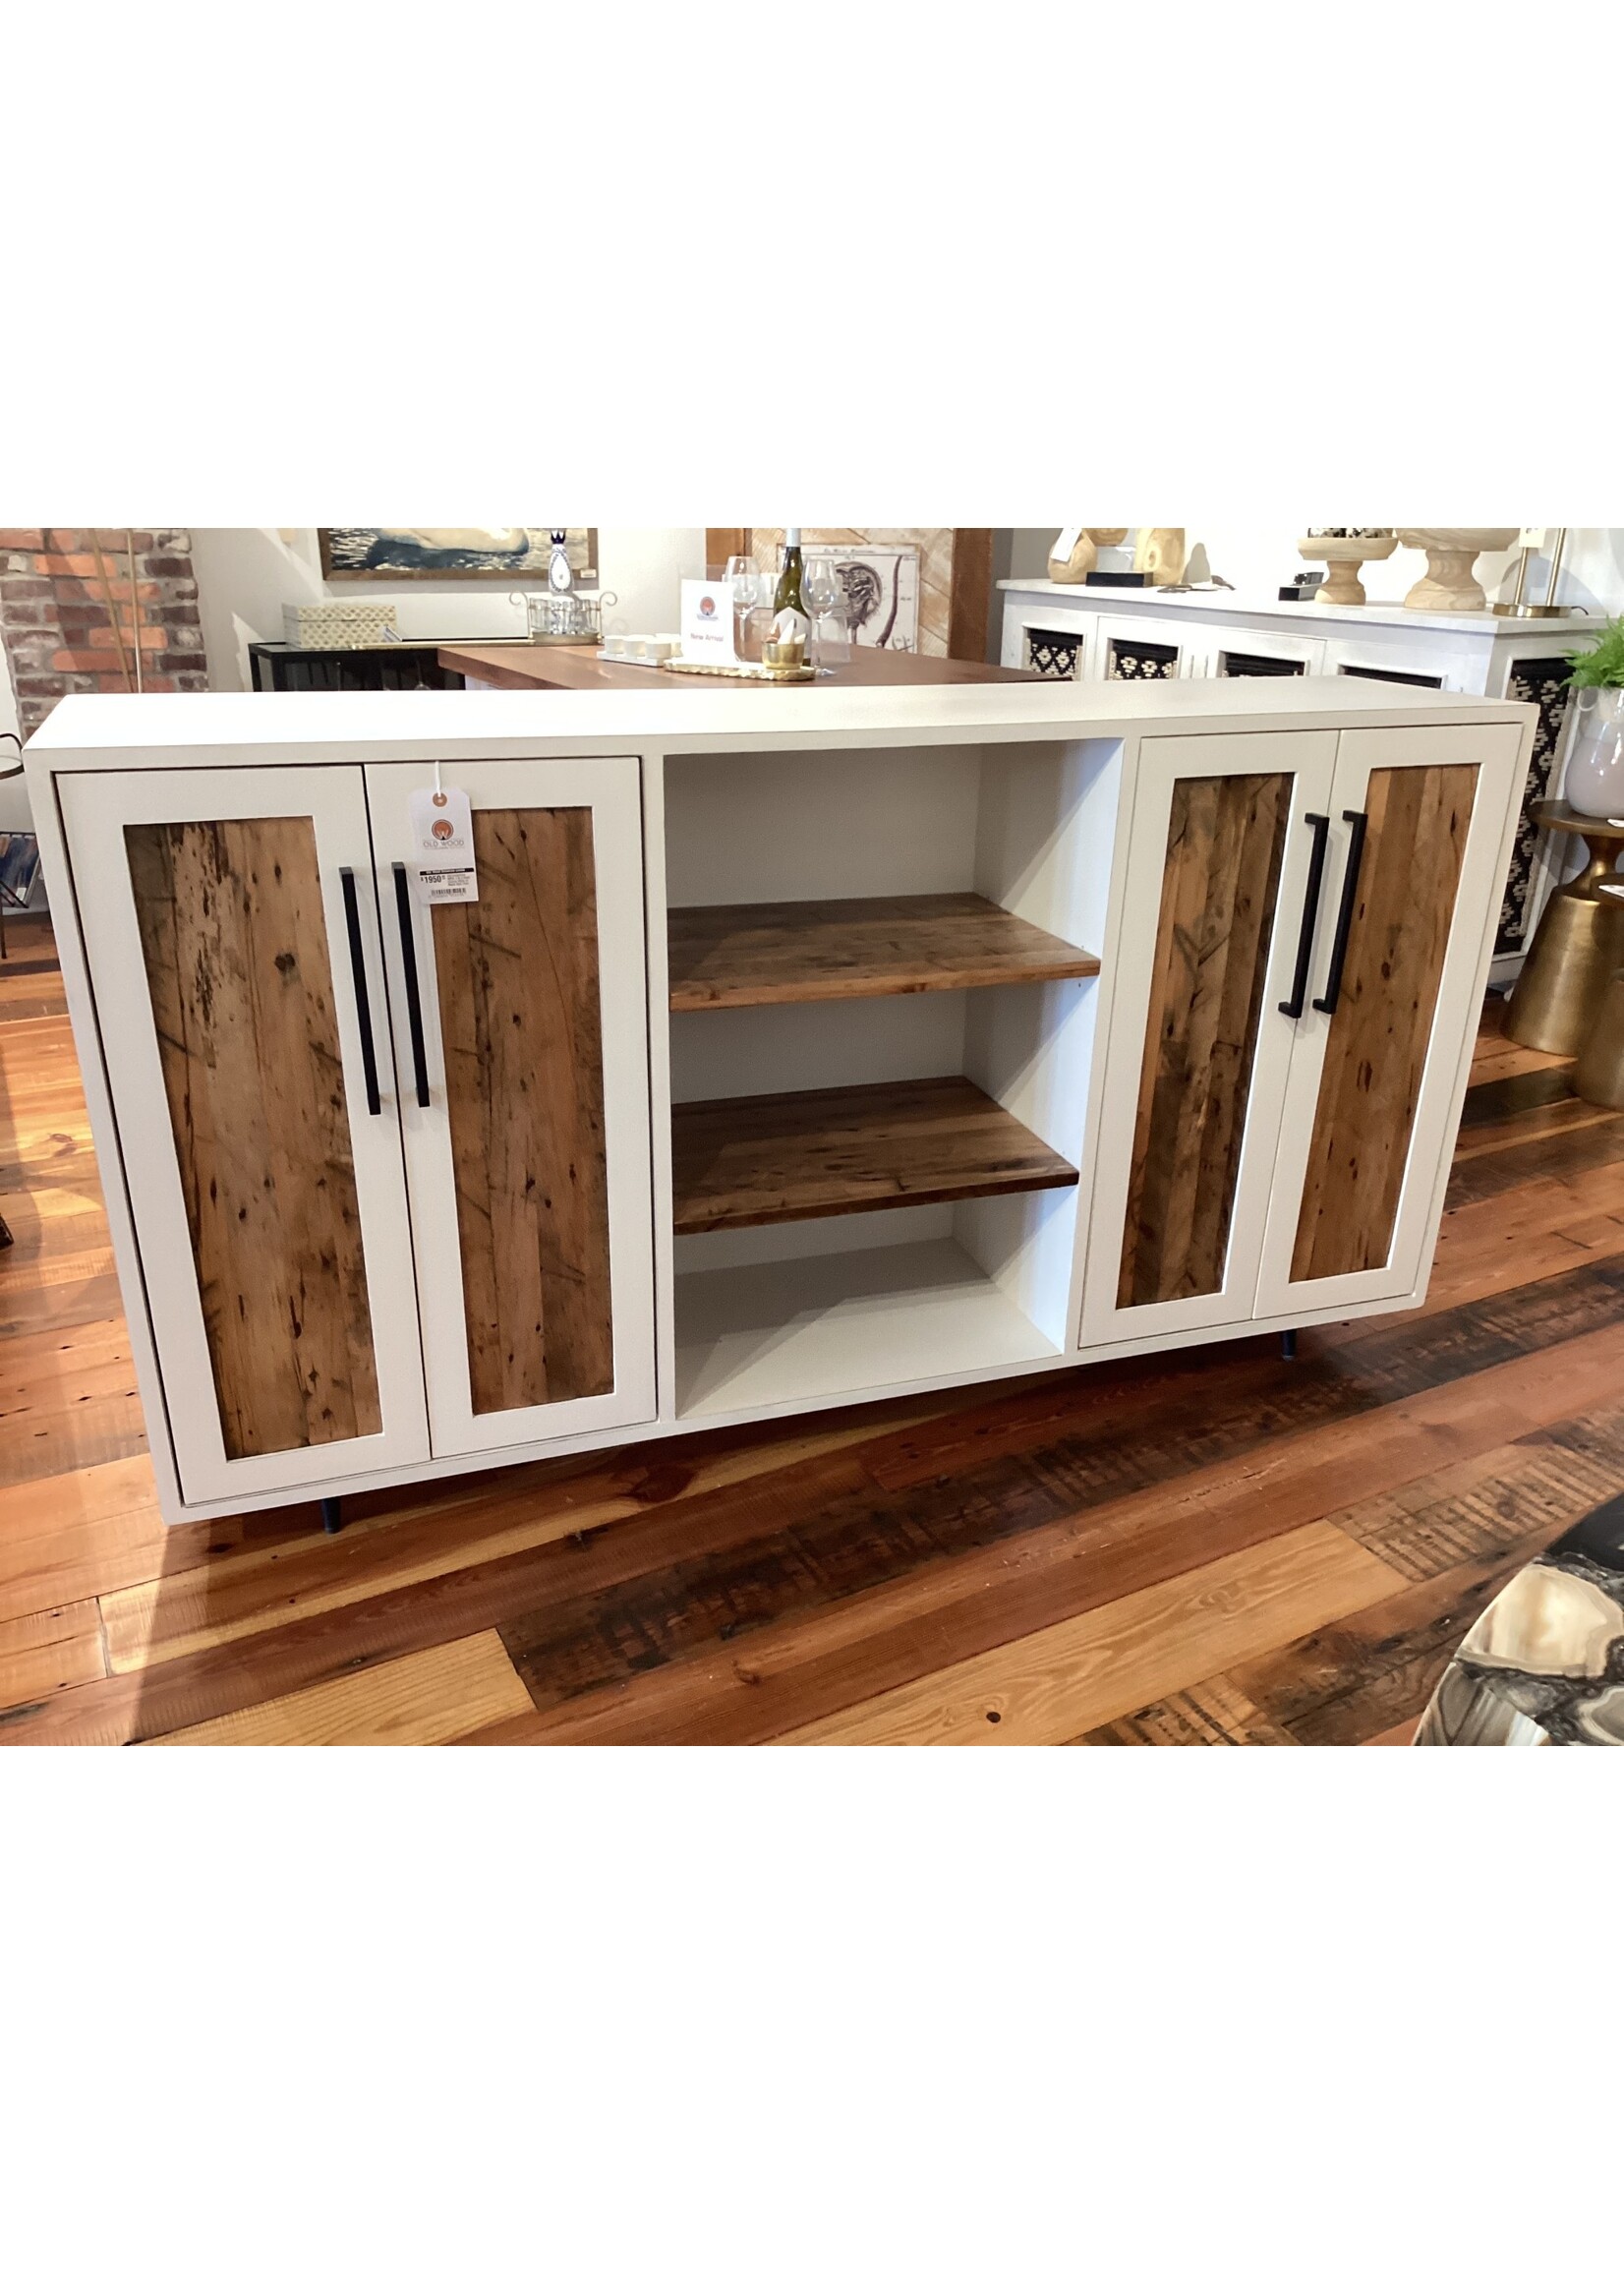 Old Wood Delaware OW EveryHome WPOF 4 Dr 2 Shelf Cabinet White w/ Maple Factory Floor Doors 72"Lx26"Dx40"H